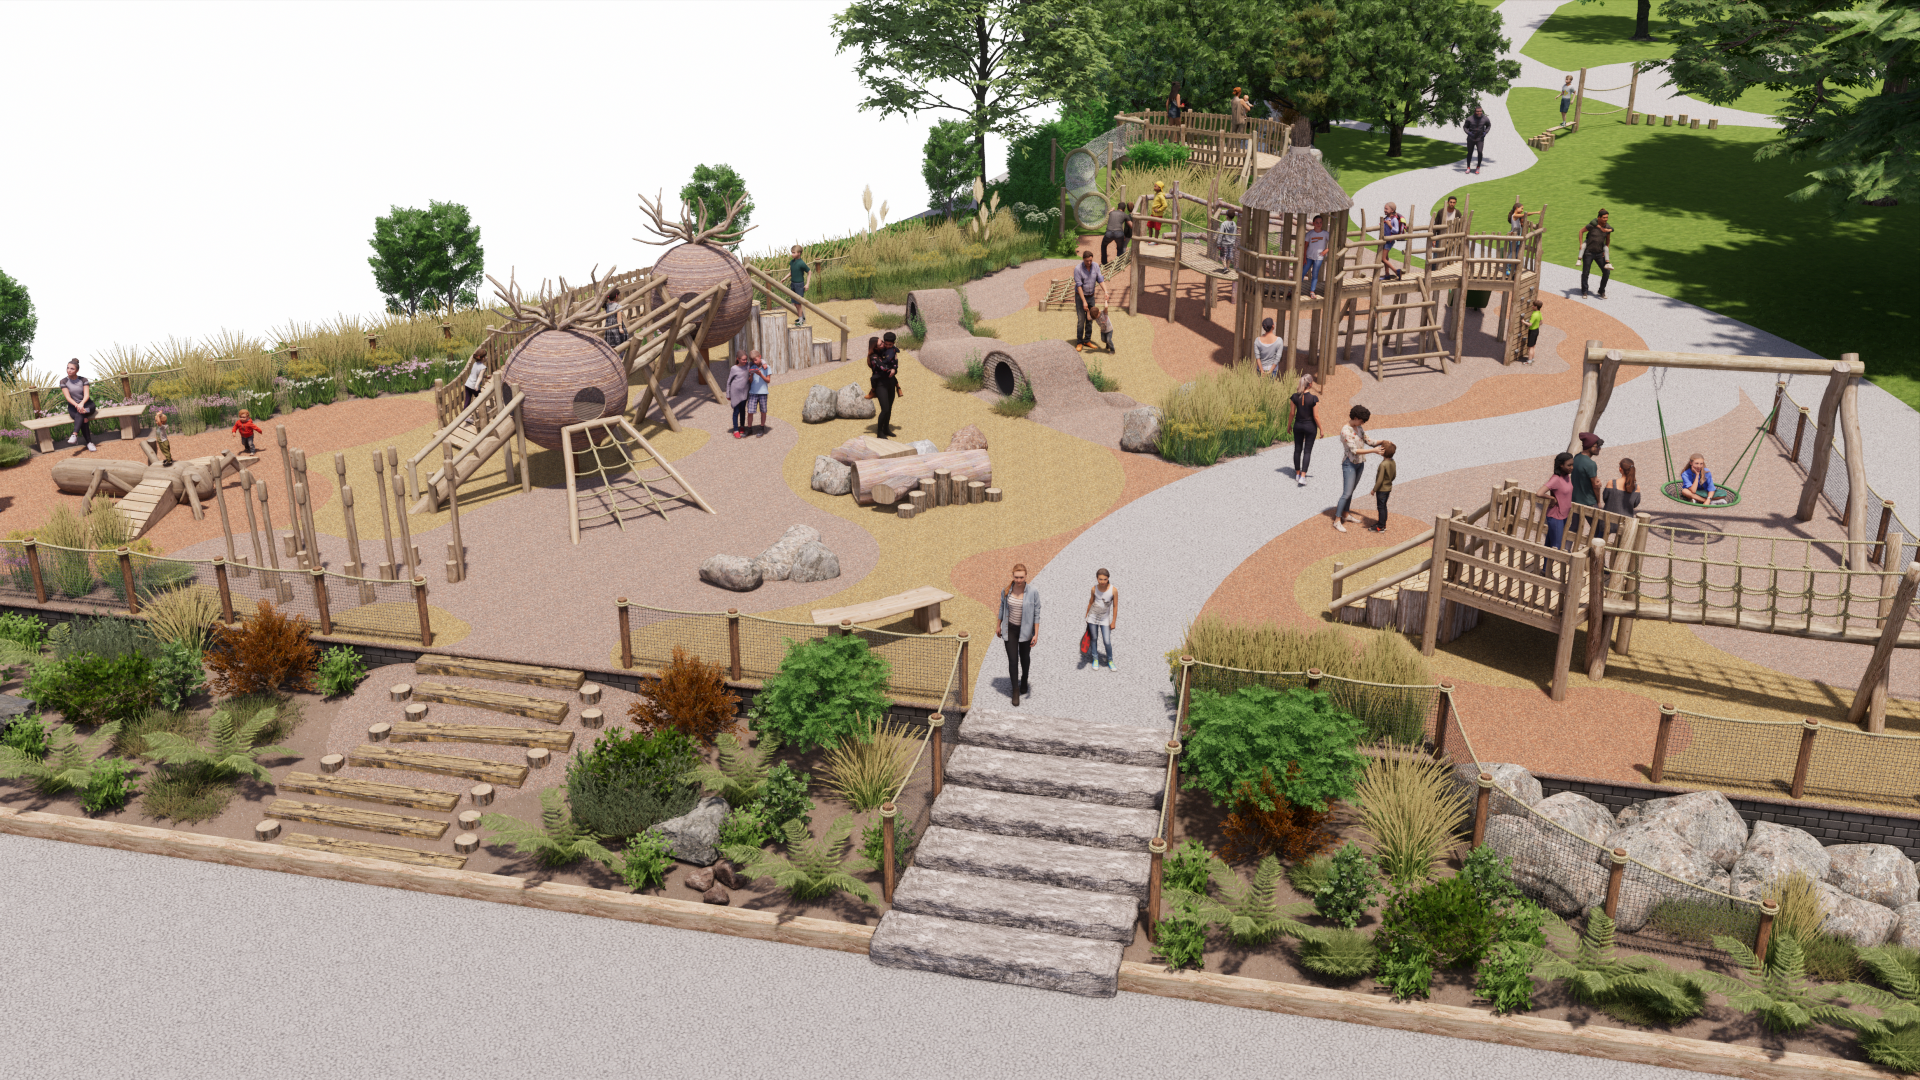 A design of the new play area at Priory Park